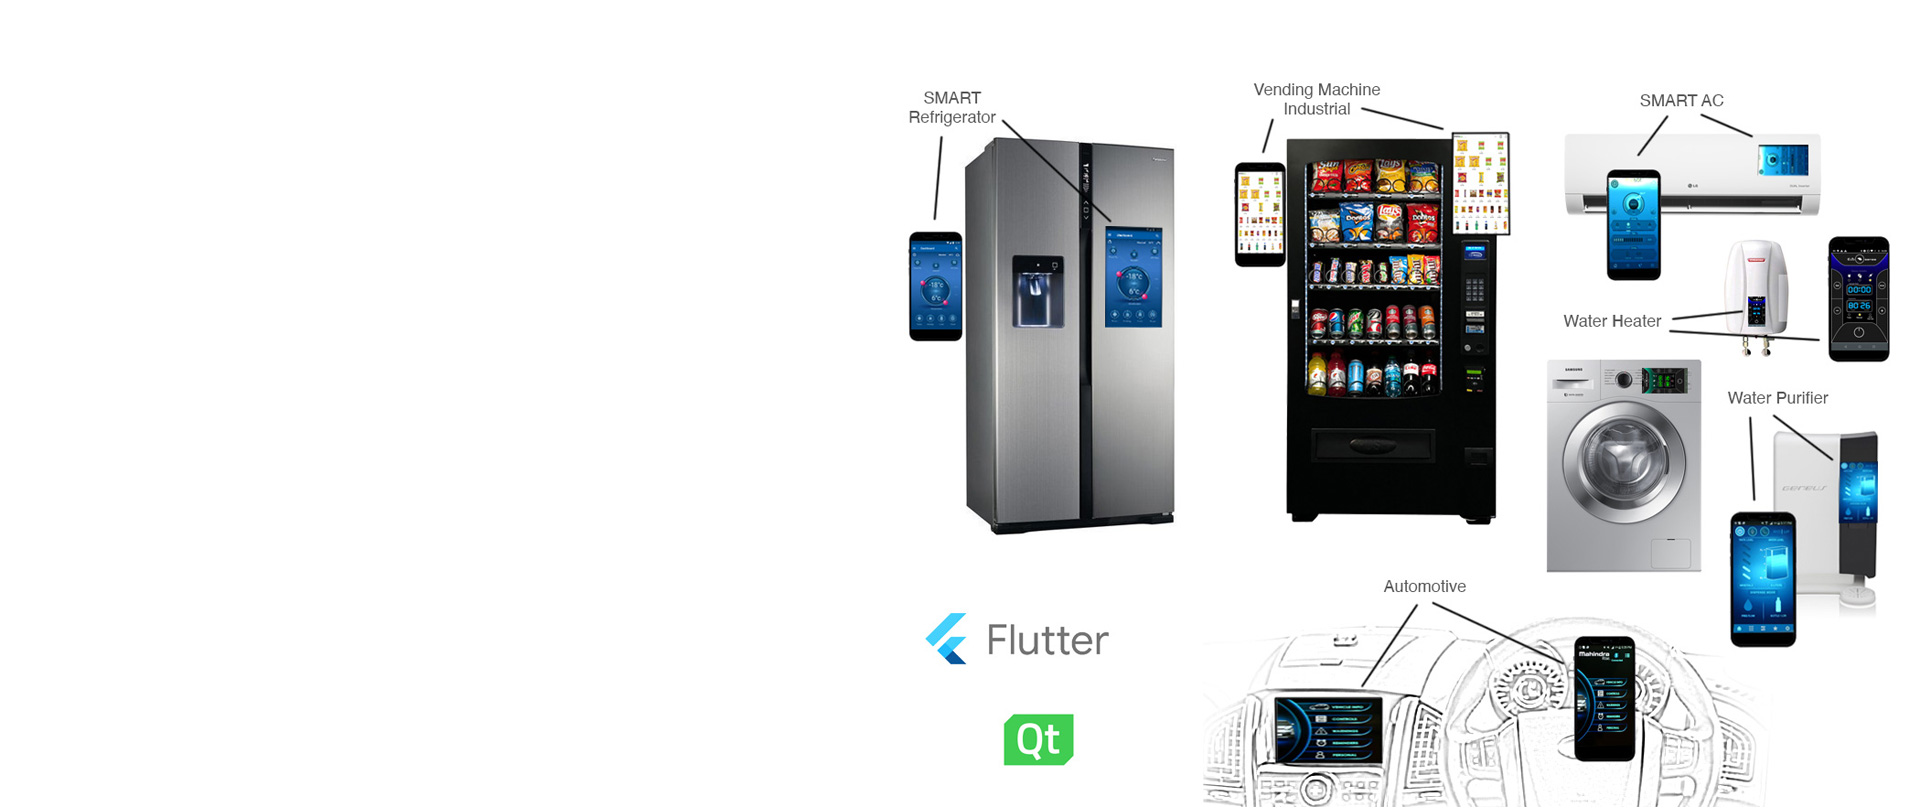 flutter and qt being used to create mobile apps and apps on electronic products